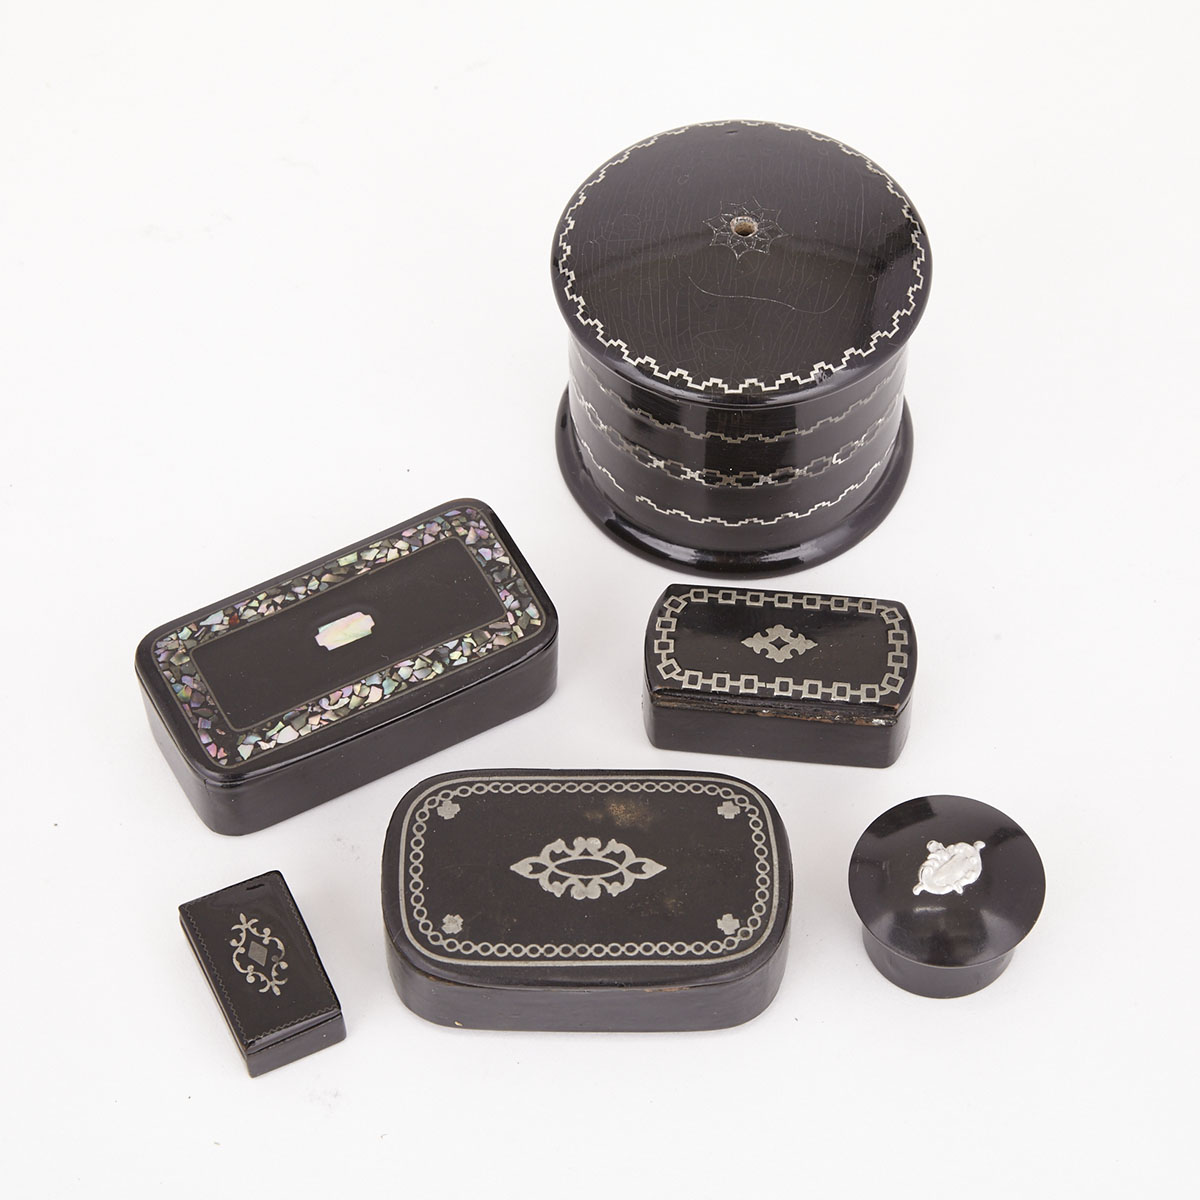 Group of Victorian Silver and Mother of Pearl inlaid black lacquer Boxes, 19th century